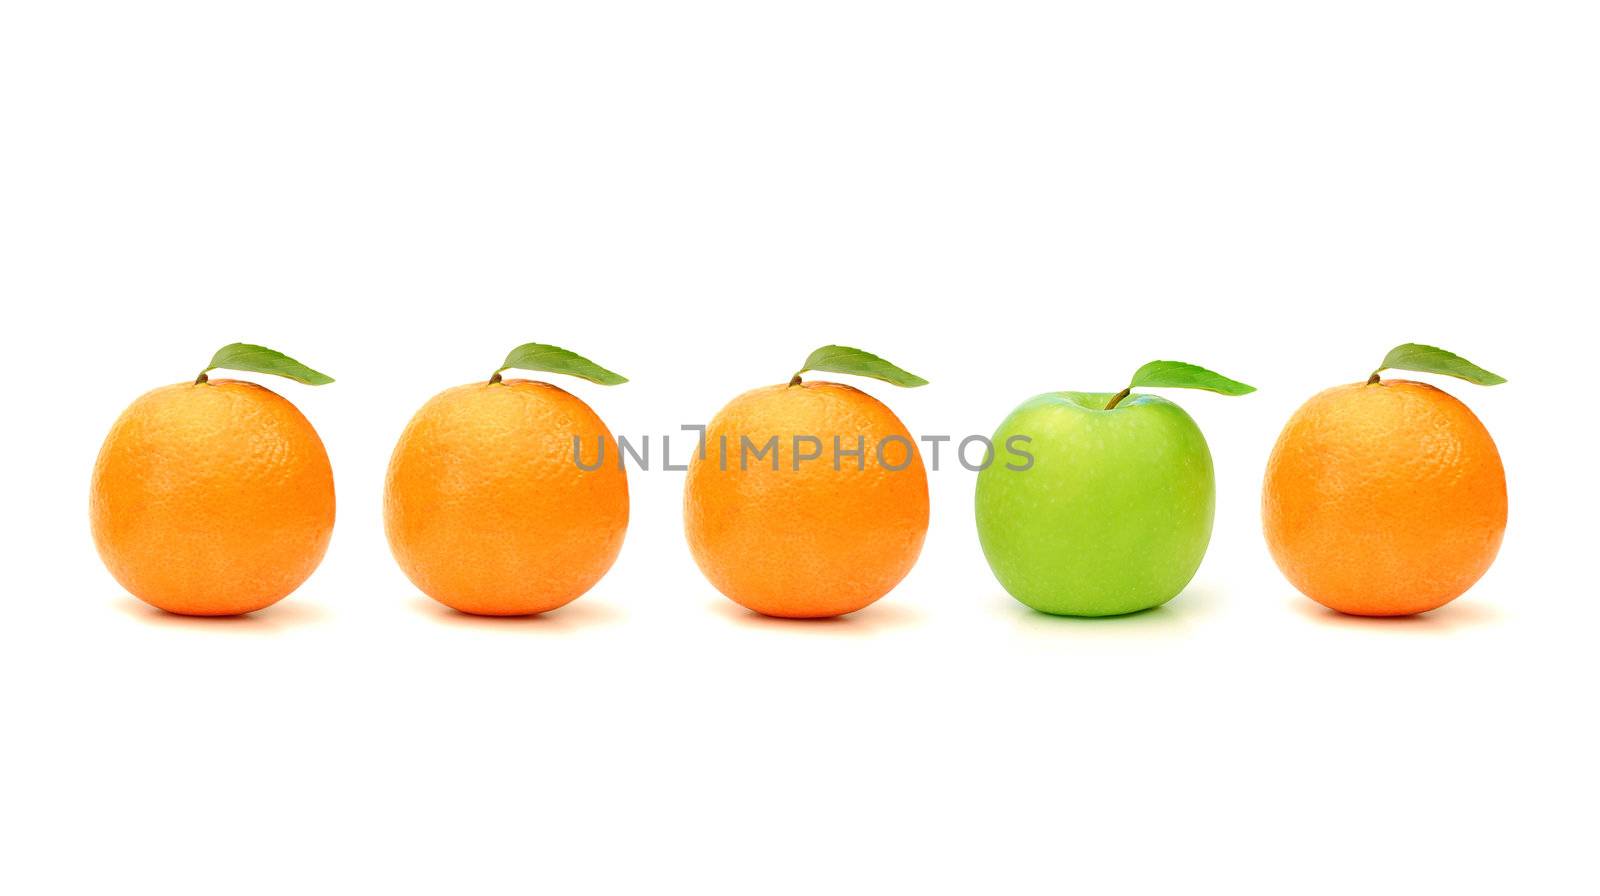 Green apple stands out in a line of oranges